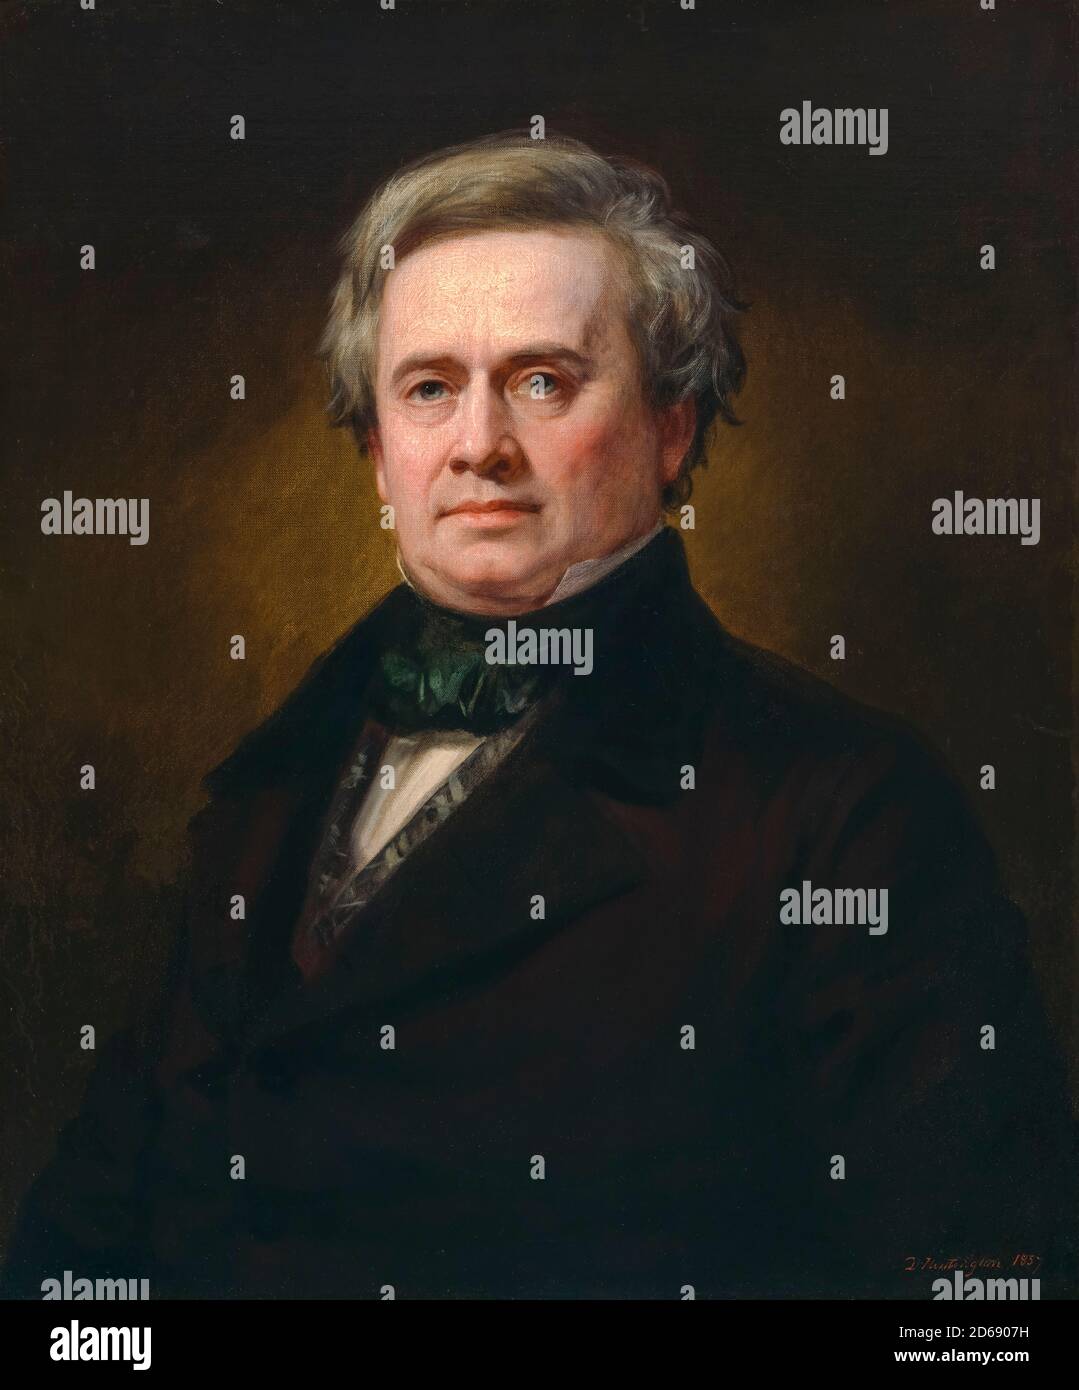 Joseph Henry (1797-1878), American scientist and First Secretary of the Smithsonian Institution, portrait painting by Daniel Huntington, 1857 Stock Photo